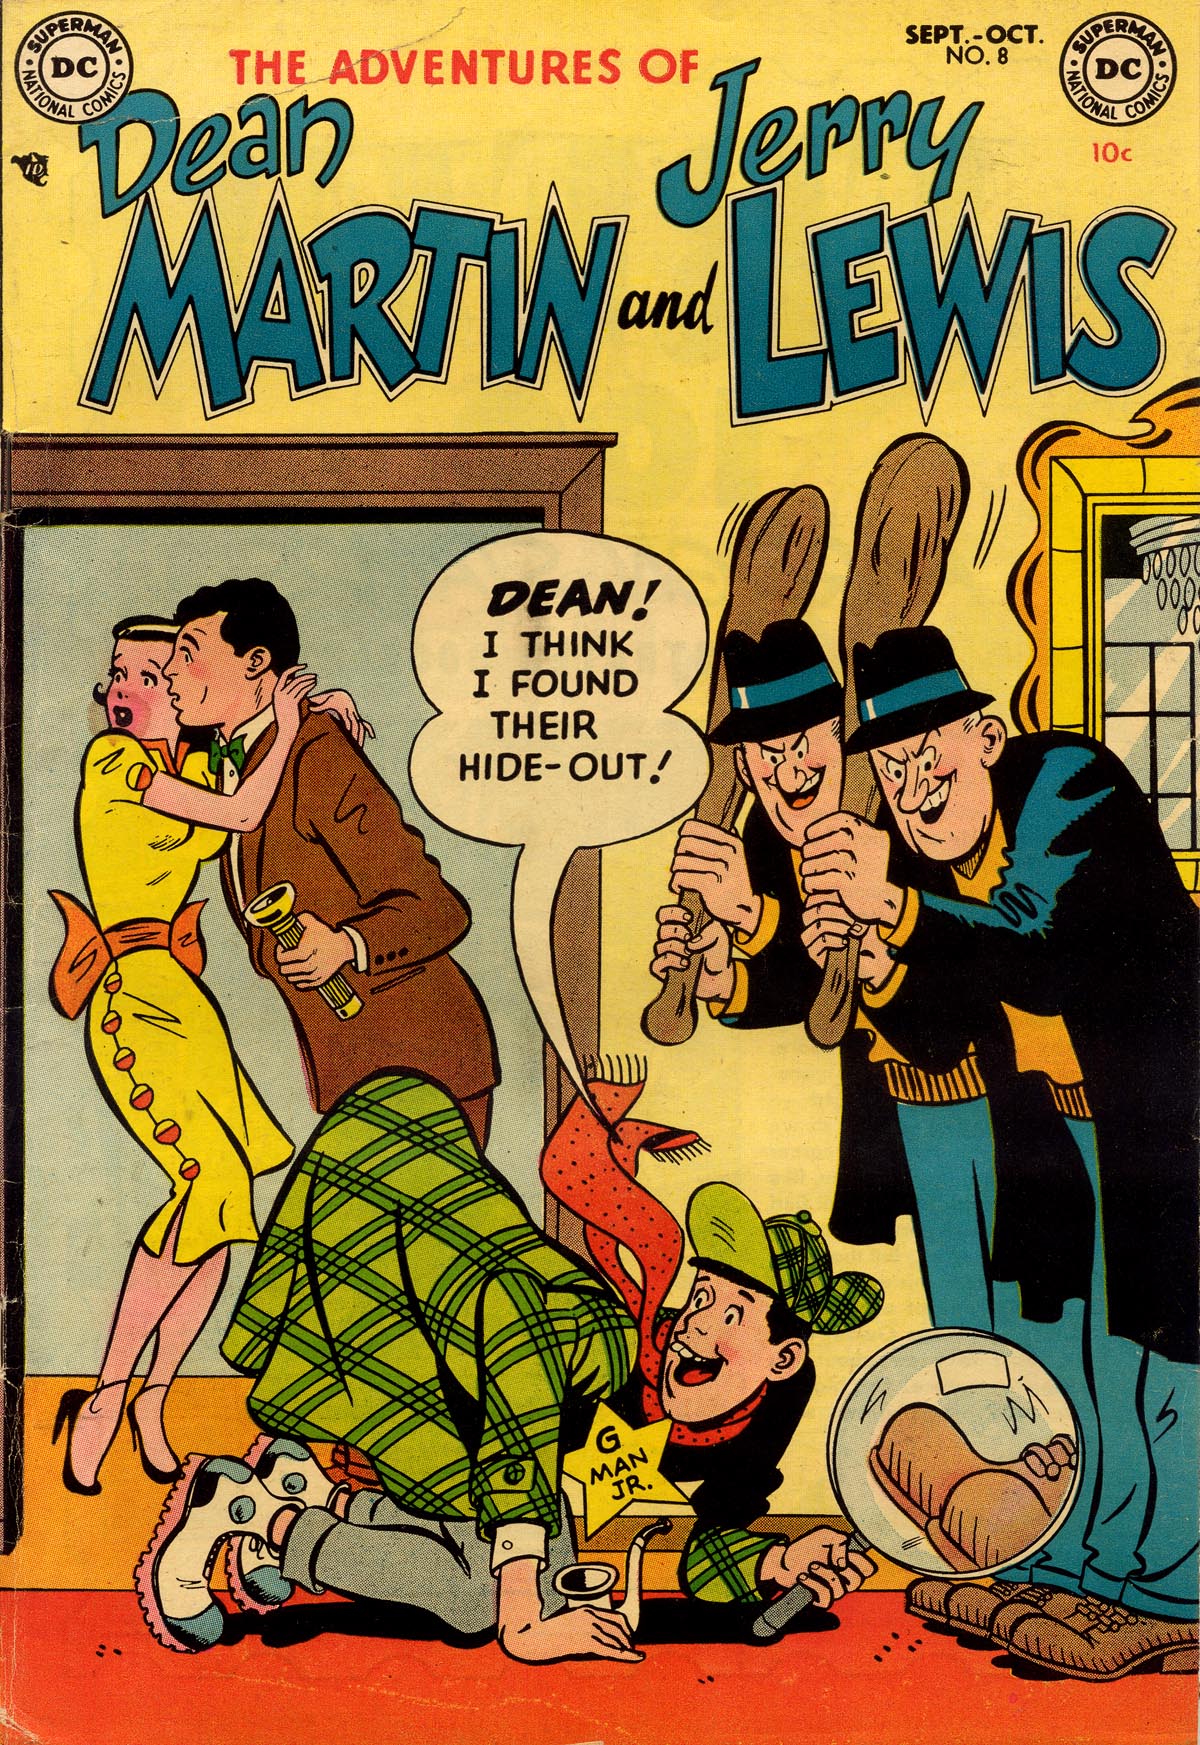 The Adventures of Dean Martin and Jerry Lewis 8 Page 1